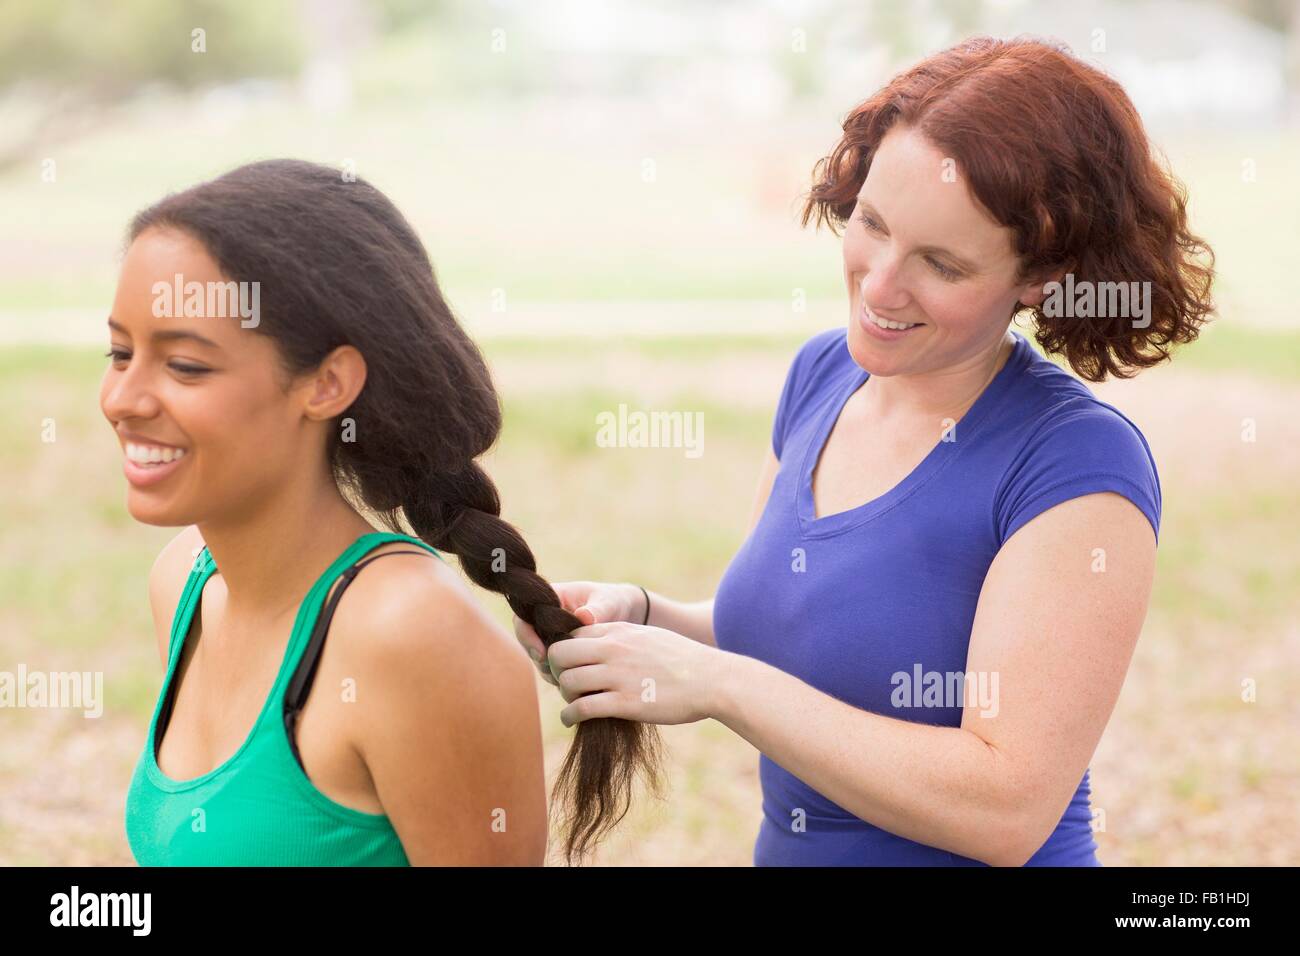 Young woman behind friend plaiting hair smiling Stock Photo